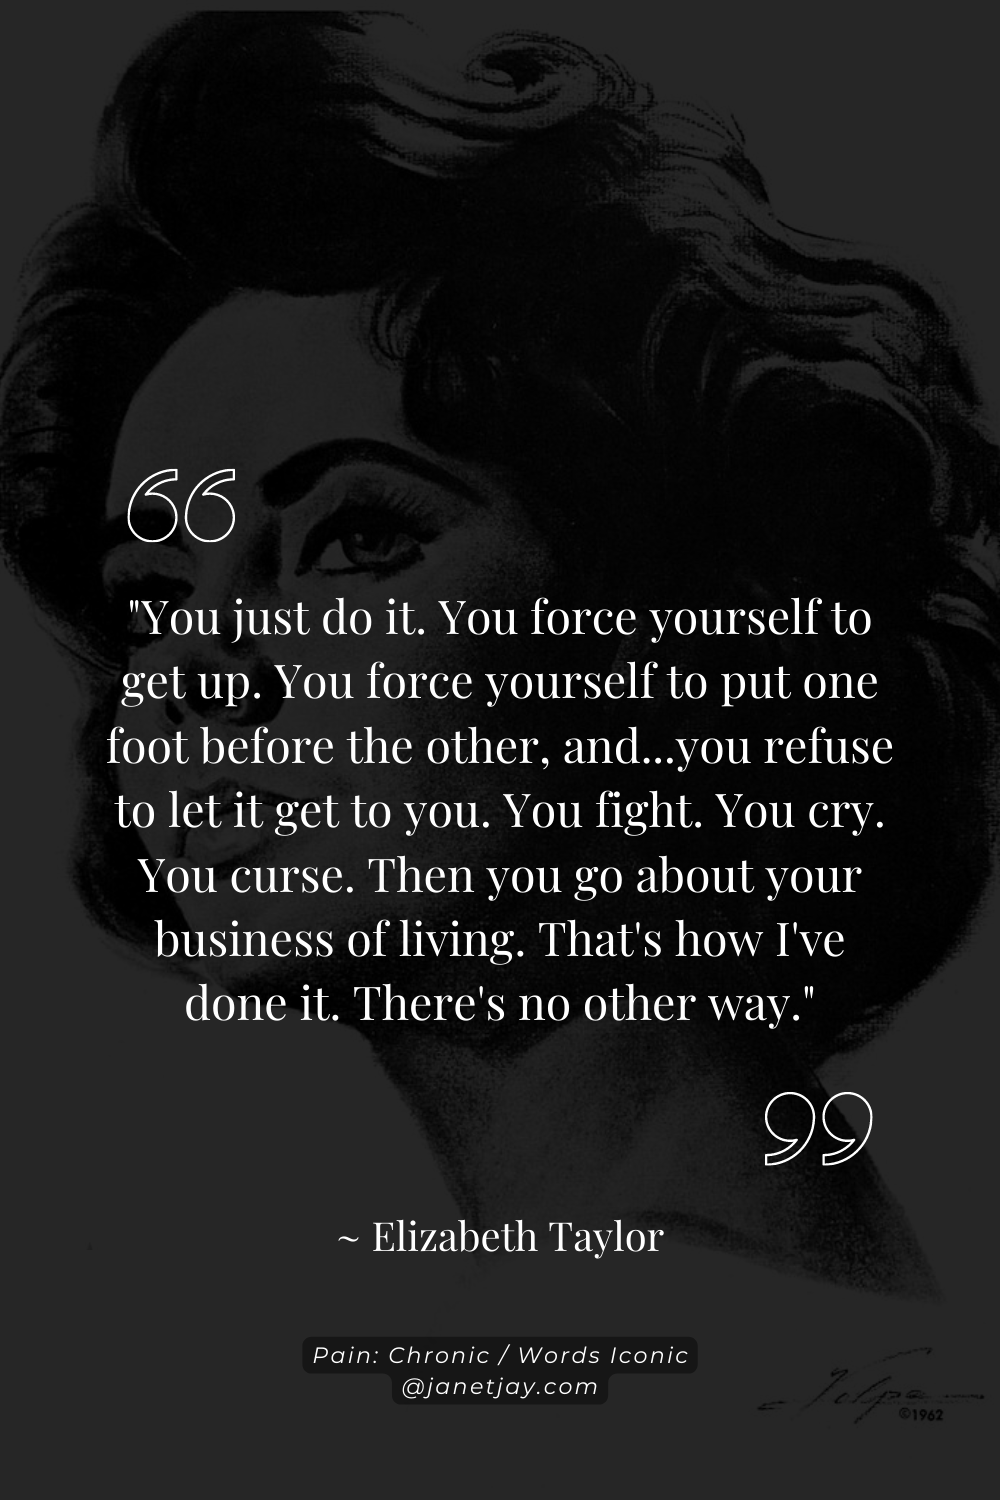 "You just do it. You force yourself to get up. You force yourself to put one foot before the other, and...you refuse to let it get to you. You fight. You cry. You curse. Then you go about your business of living. That's how I've done it. There's no other way." Elizabeth Taylor janetjay.com